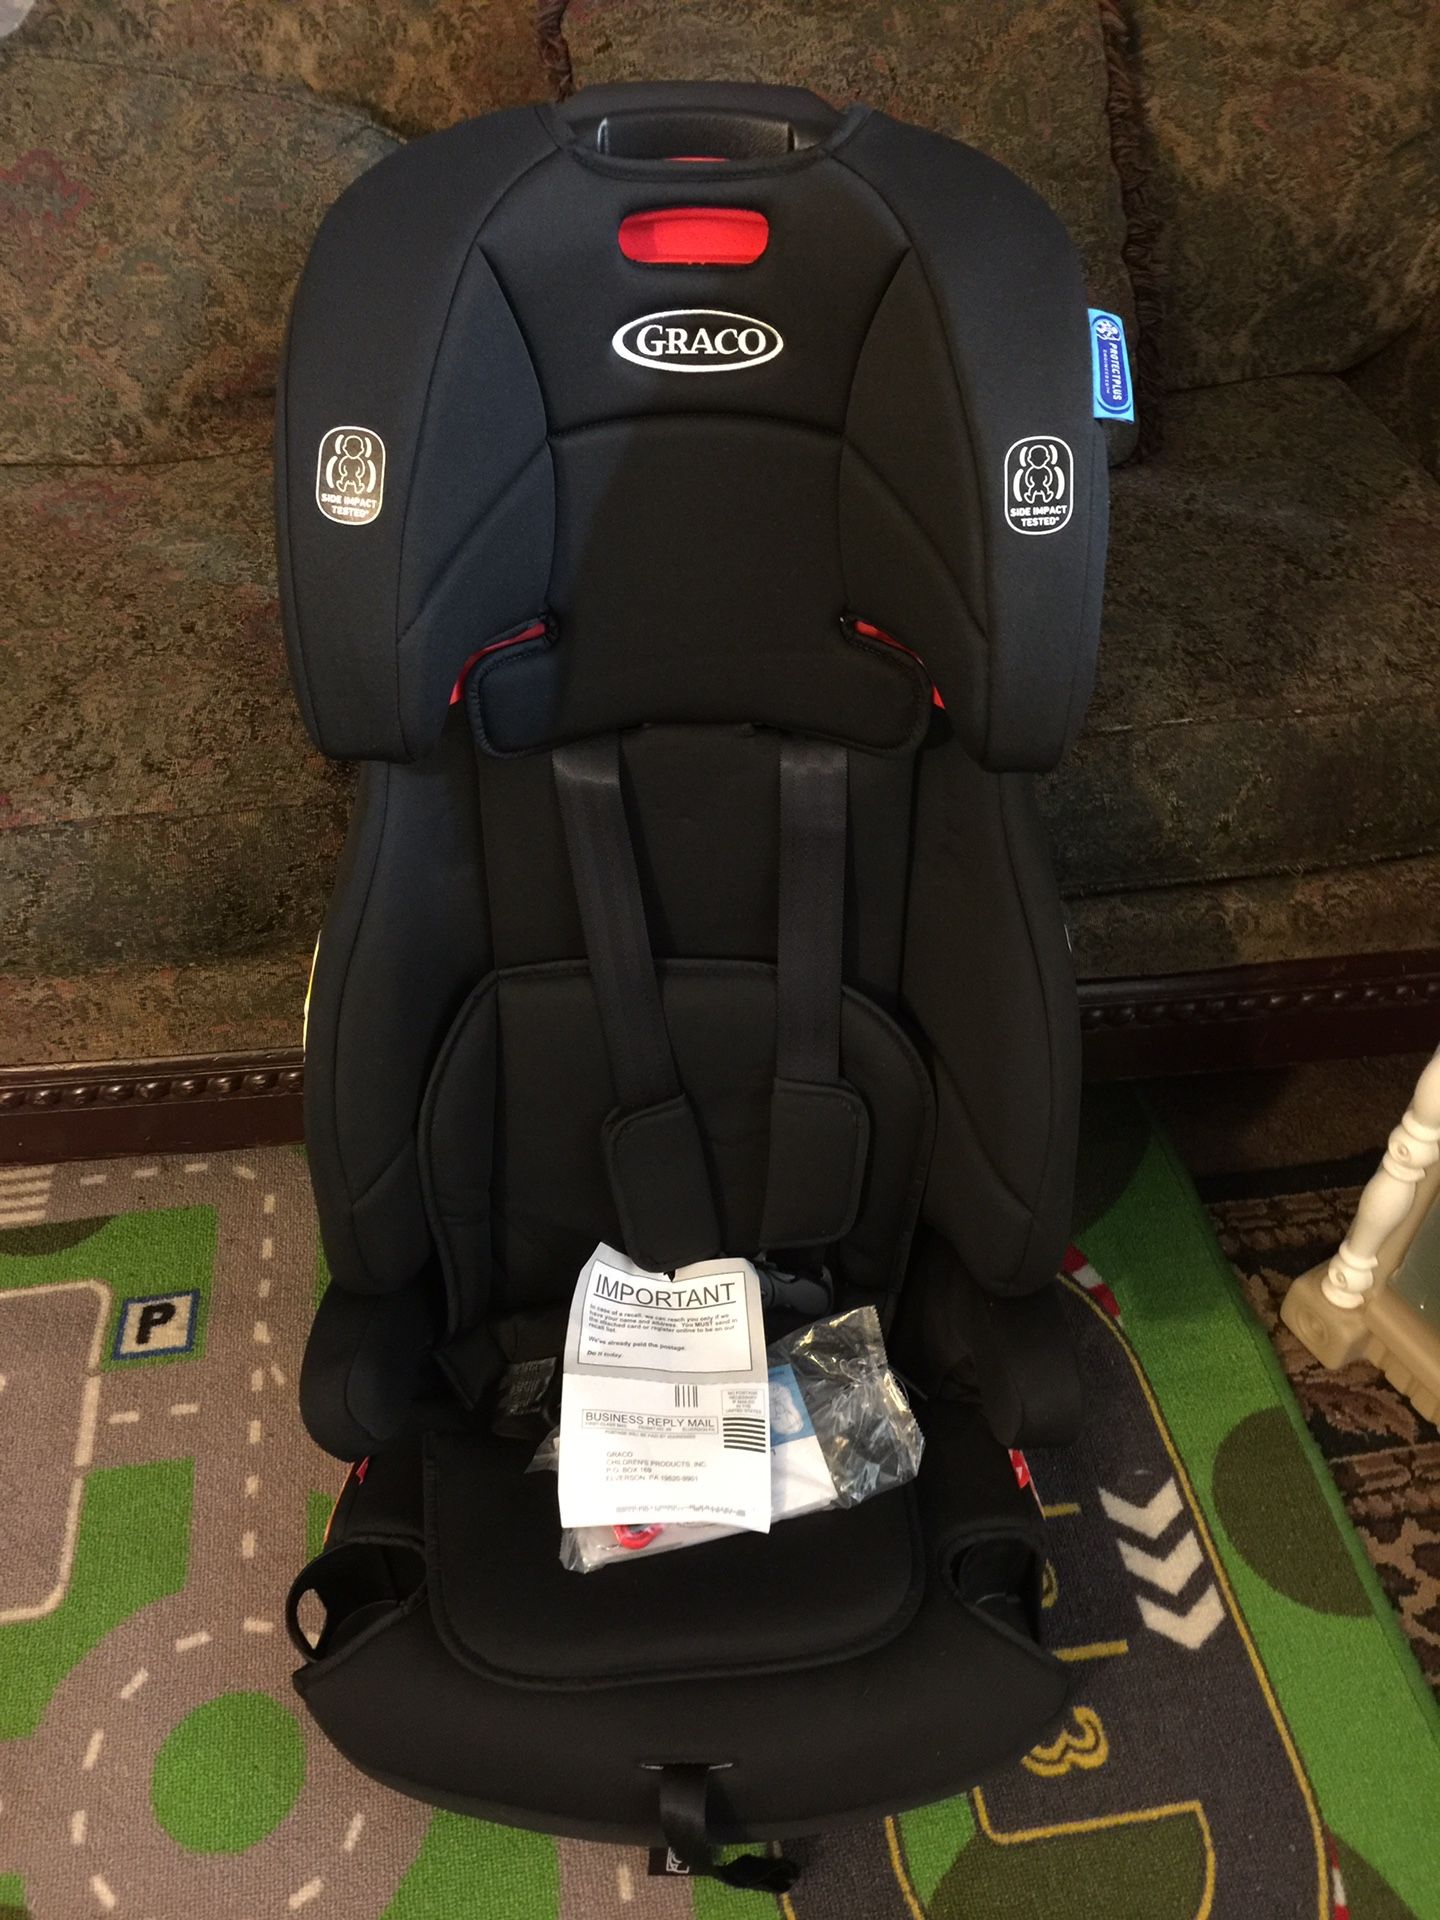 BRAND NEW TODDLER BOOSTER SEAT